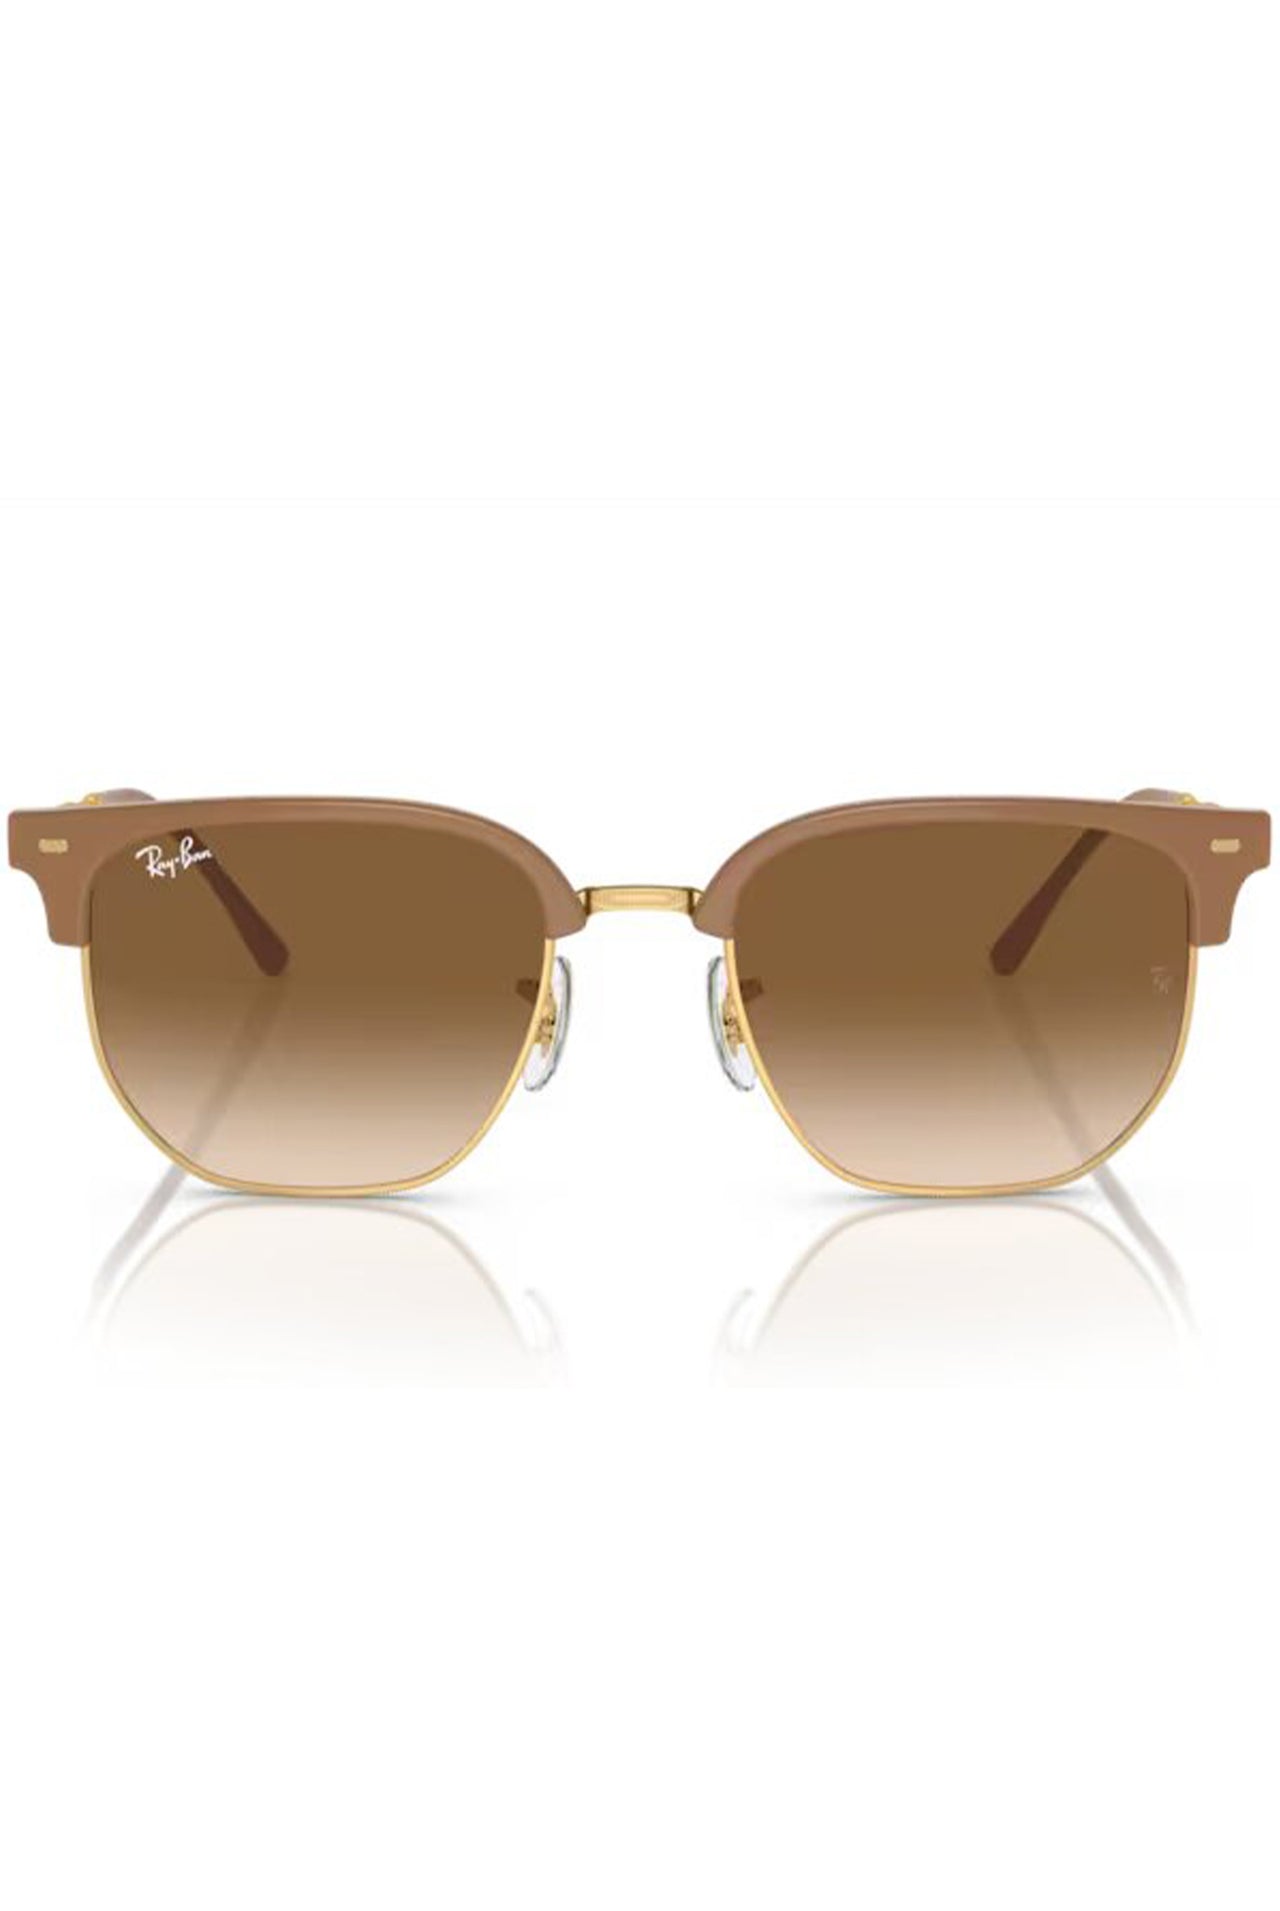 Gafas Ray-Ban New Clubmaster RB4416 672151 51